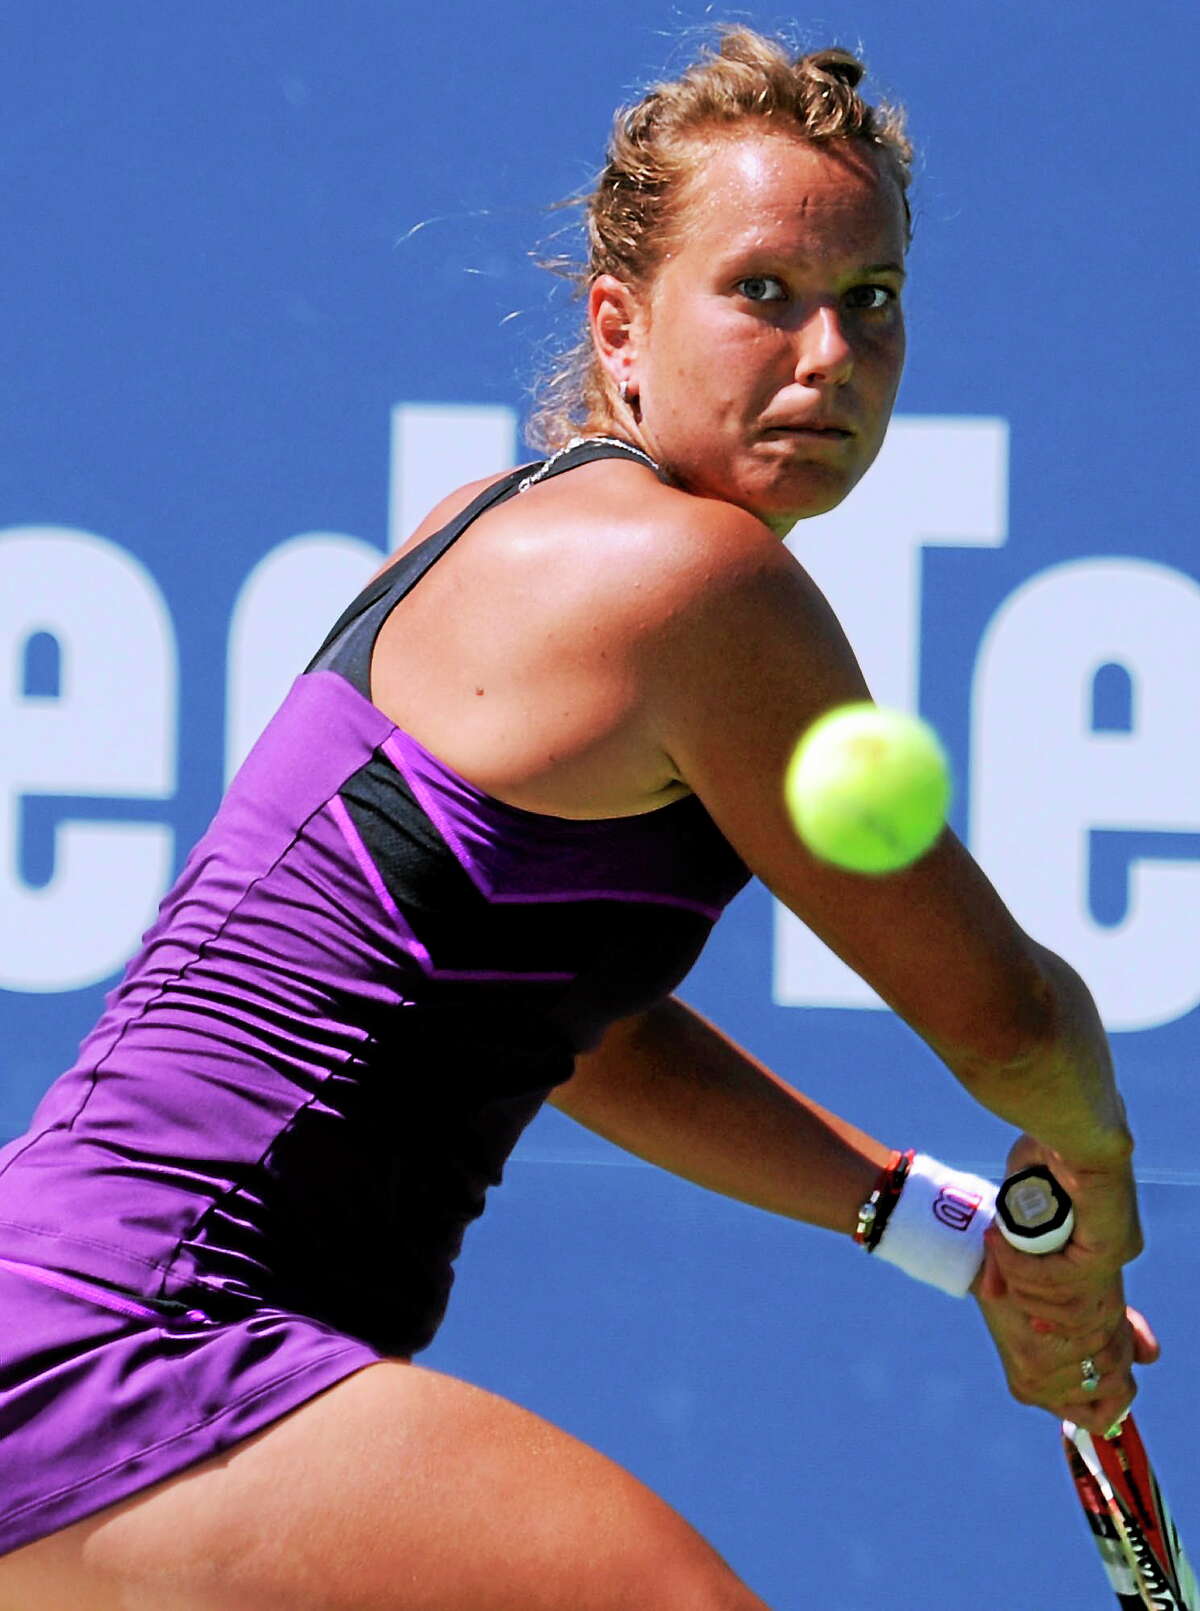 Barbora Zahlavova Strycova defeated Caroline Garcia 7-5, 6-2 on Tuesday afternoon at the Connecticut Open.